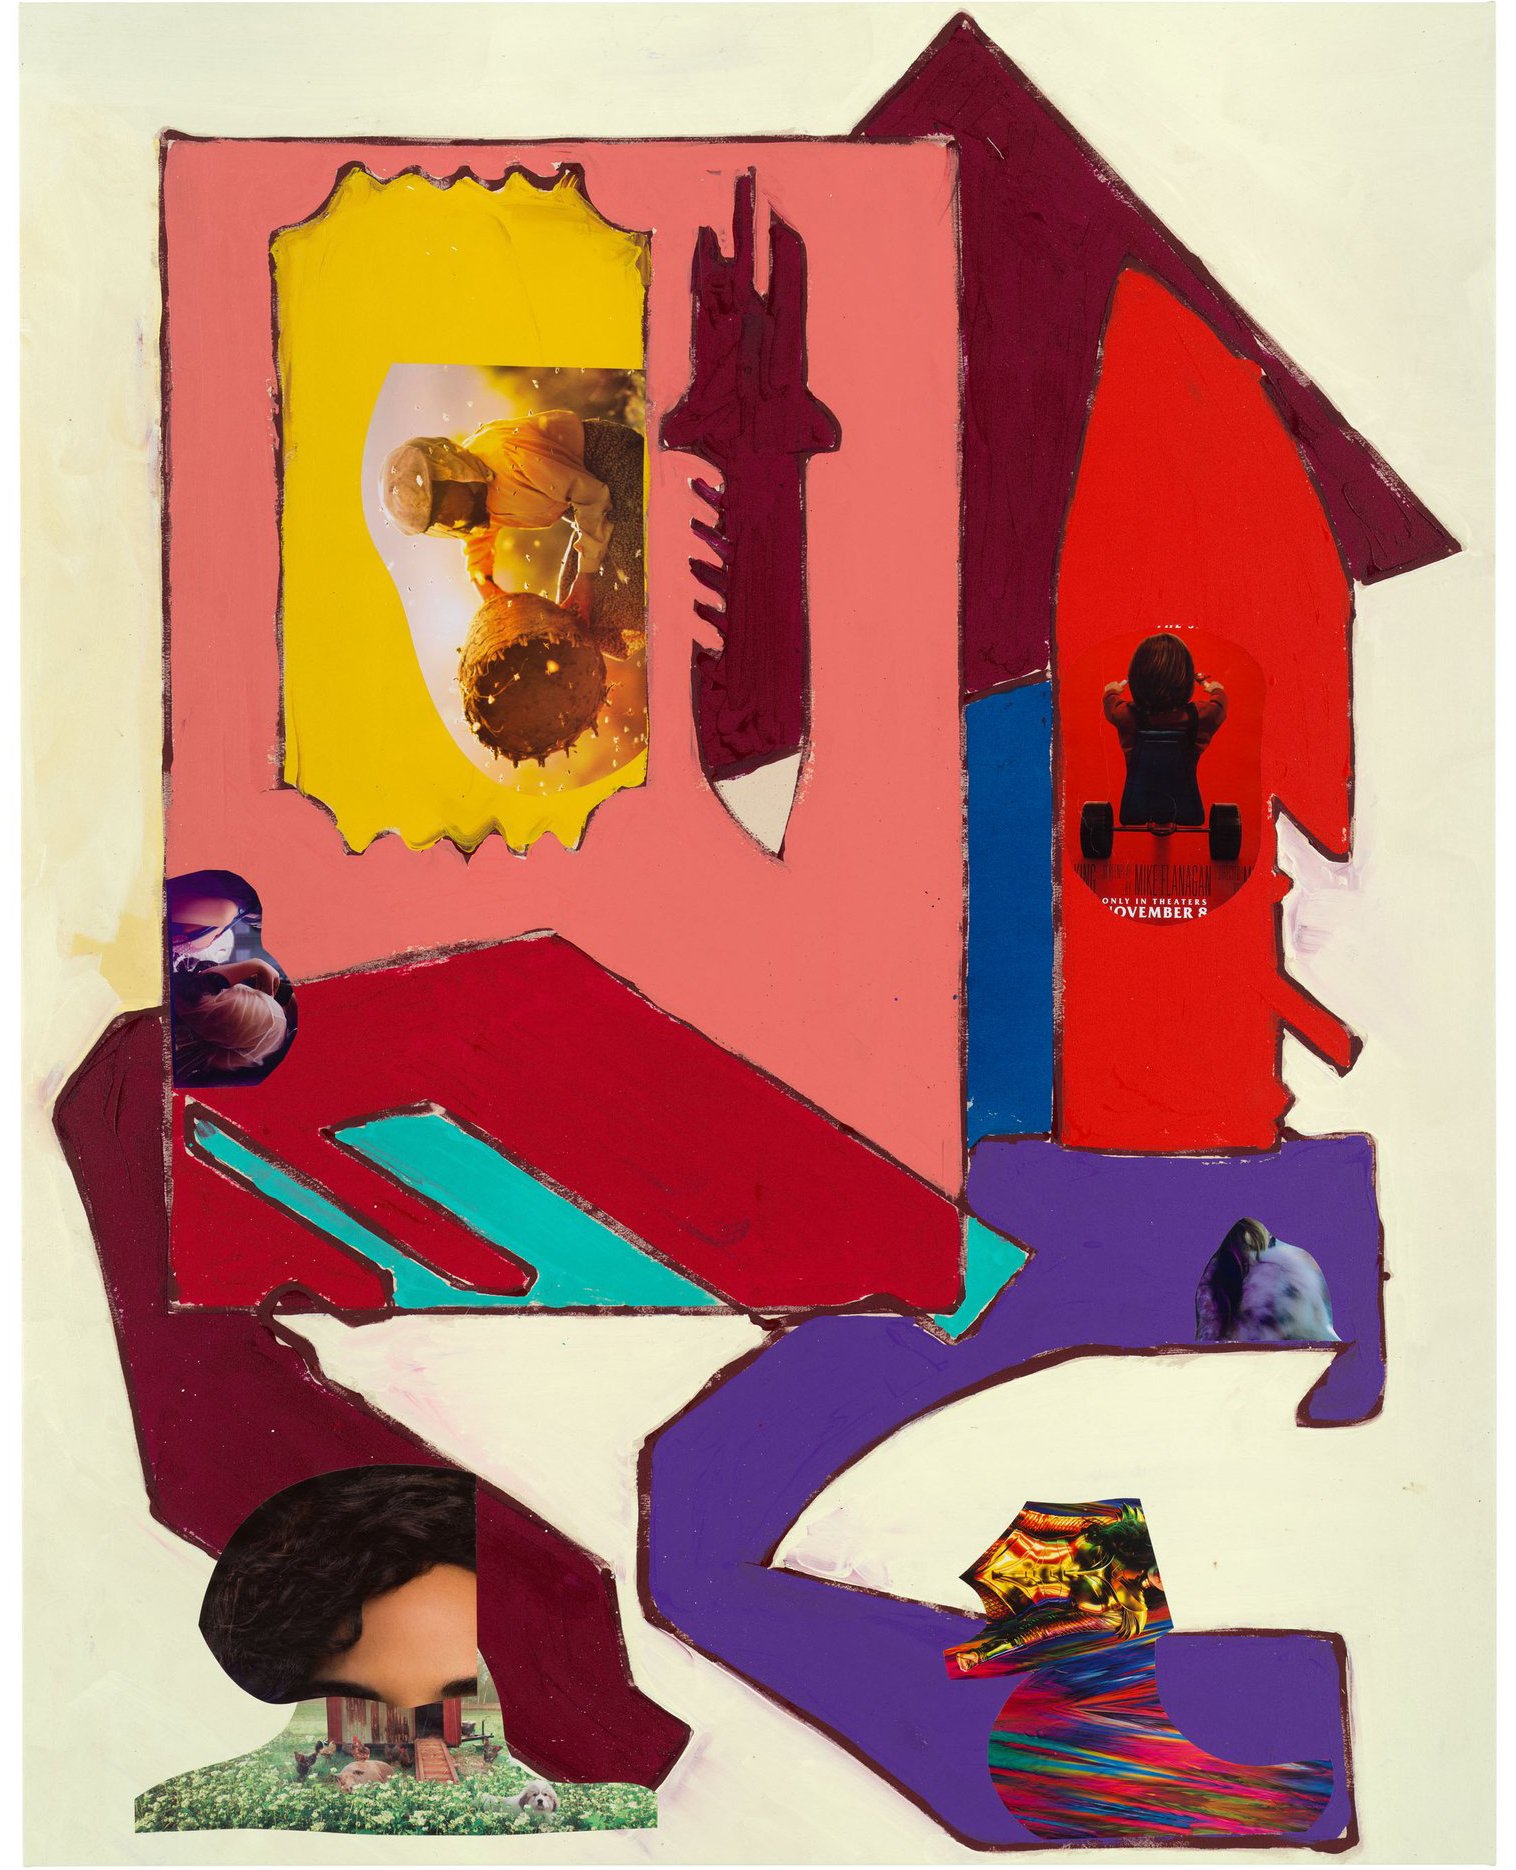  Drew Beattie  Our House in the Country   2022 acrylic and collage on canvas  96 x 76 inches   